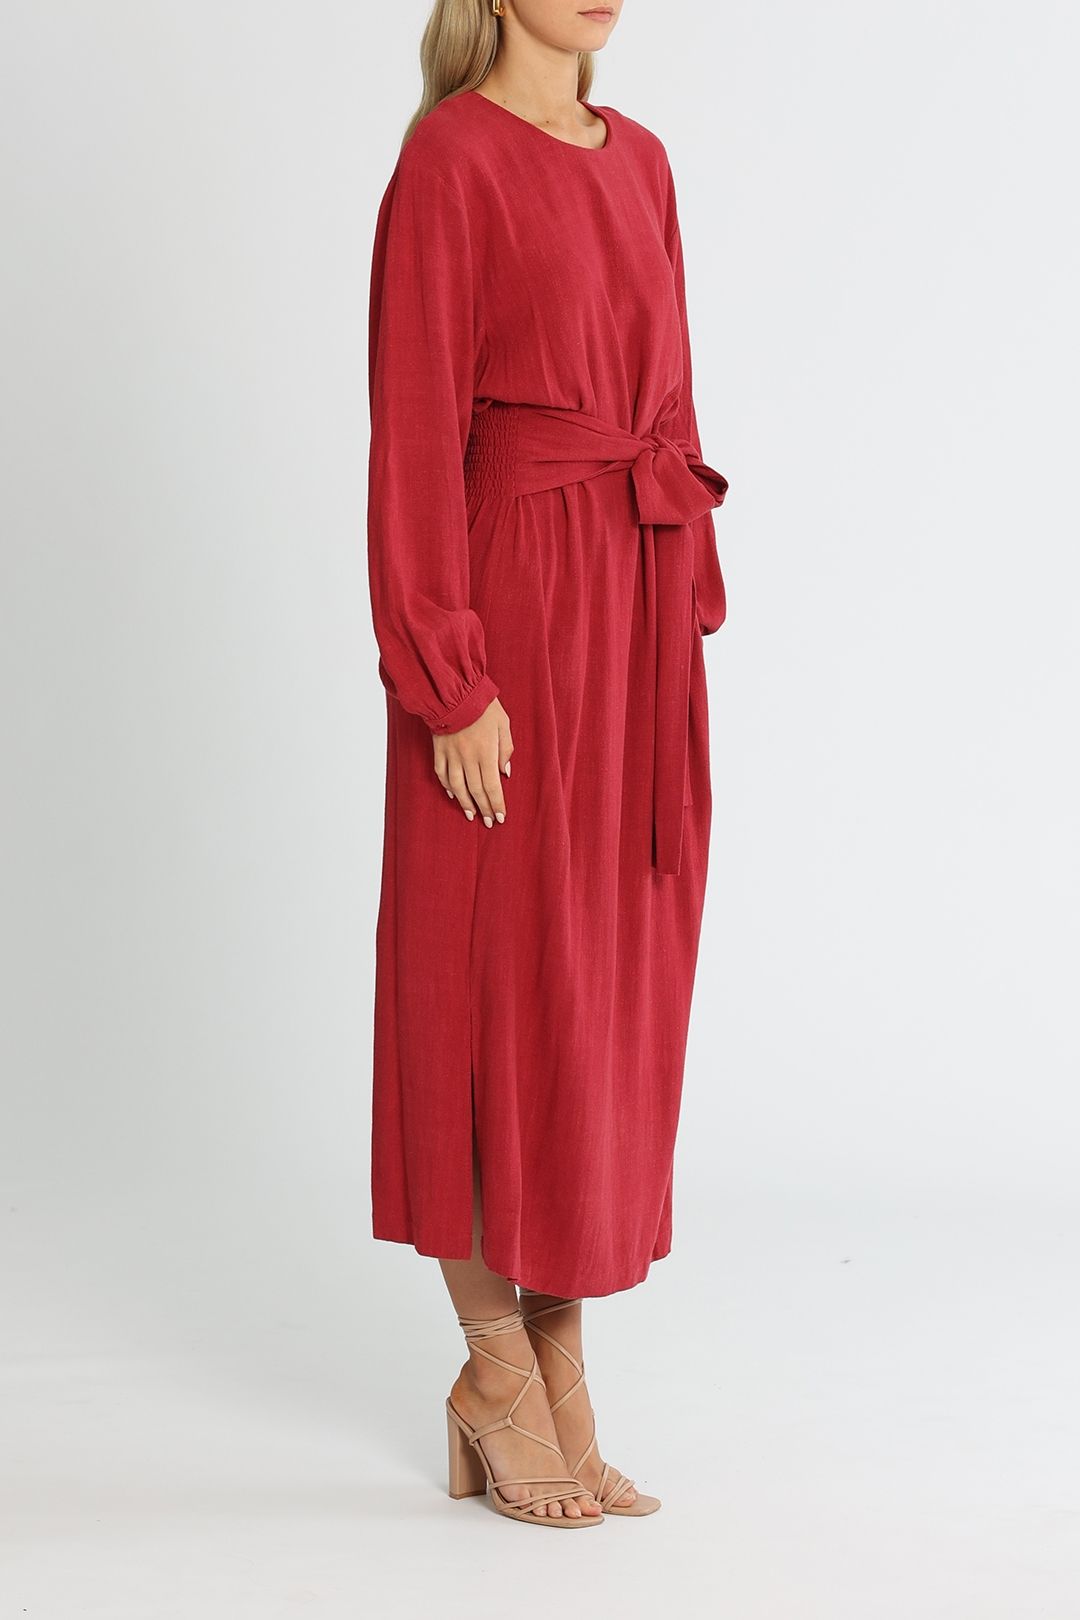 Brave and True Turning Point Dress Berry Linen Viscose Balloon Sleeves